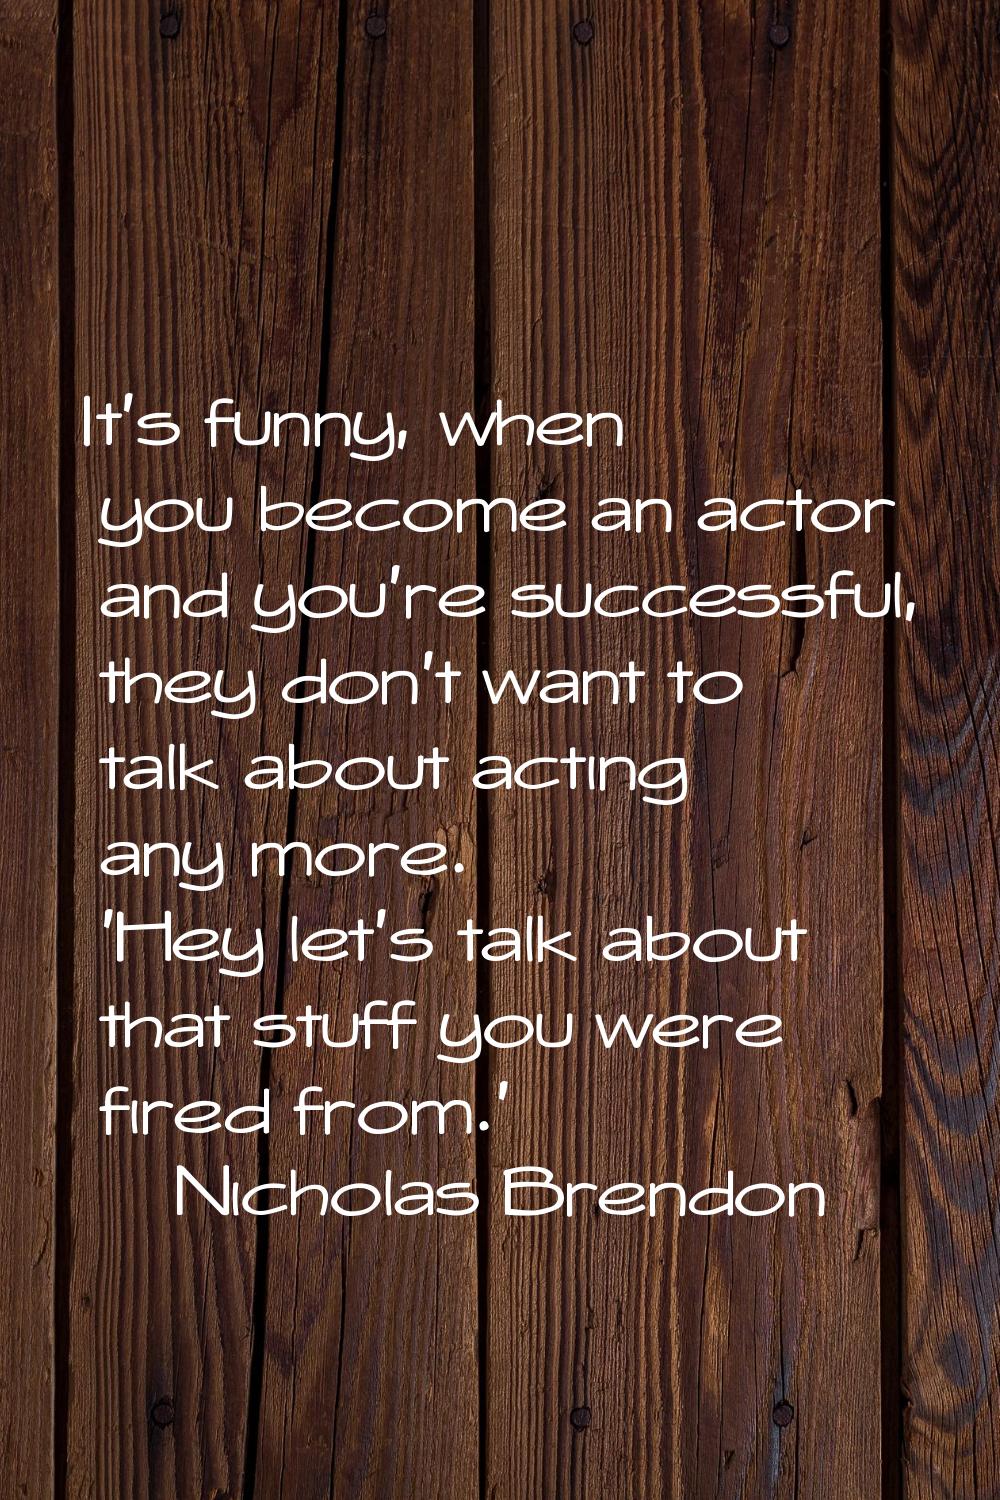 It's funny, when you become an actor and you're successful, they don't want to talk about acting an